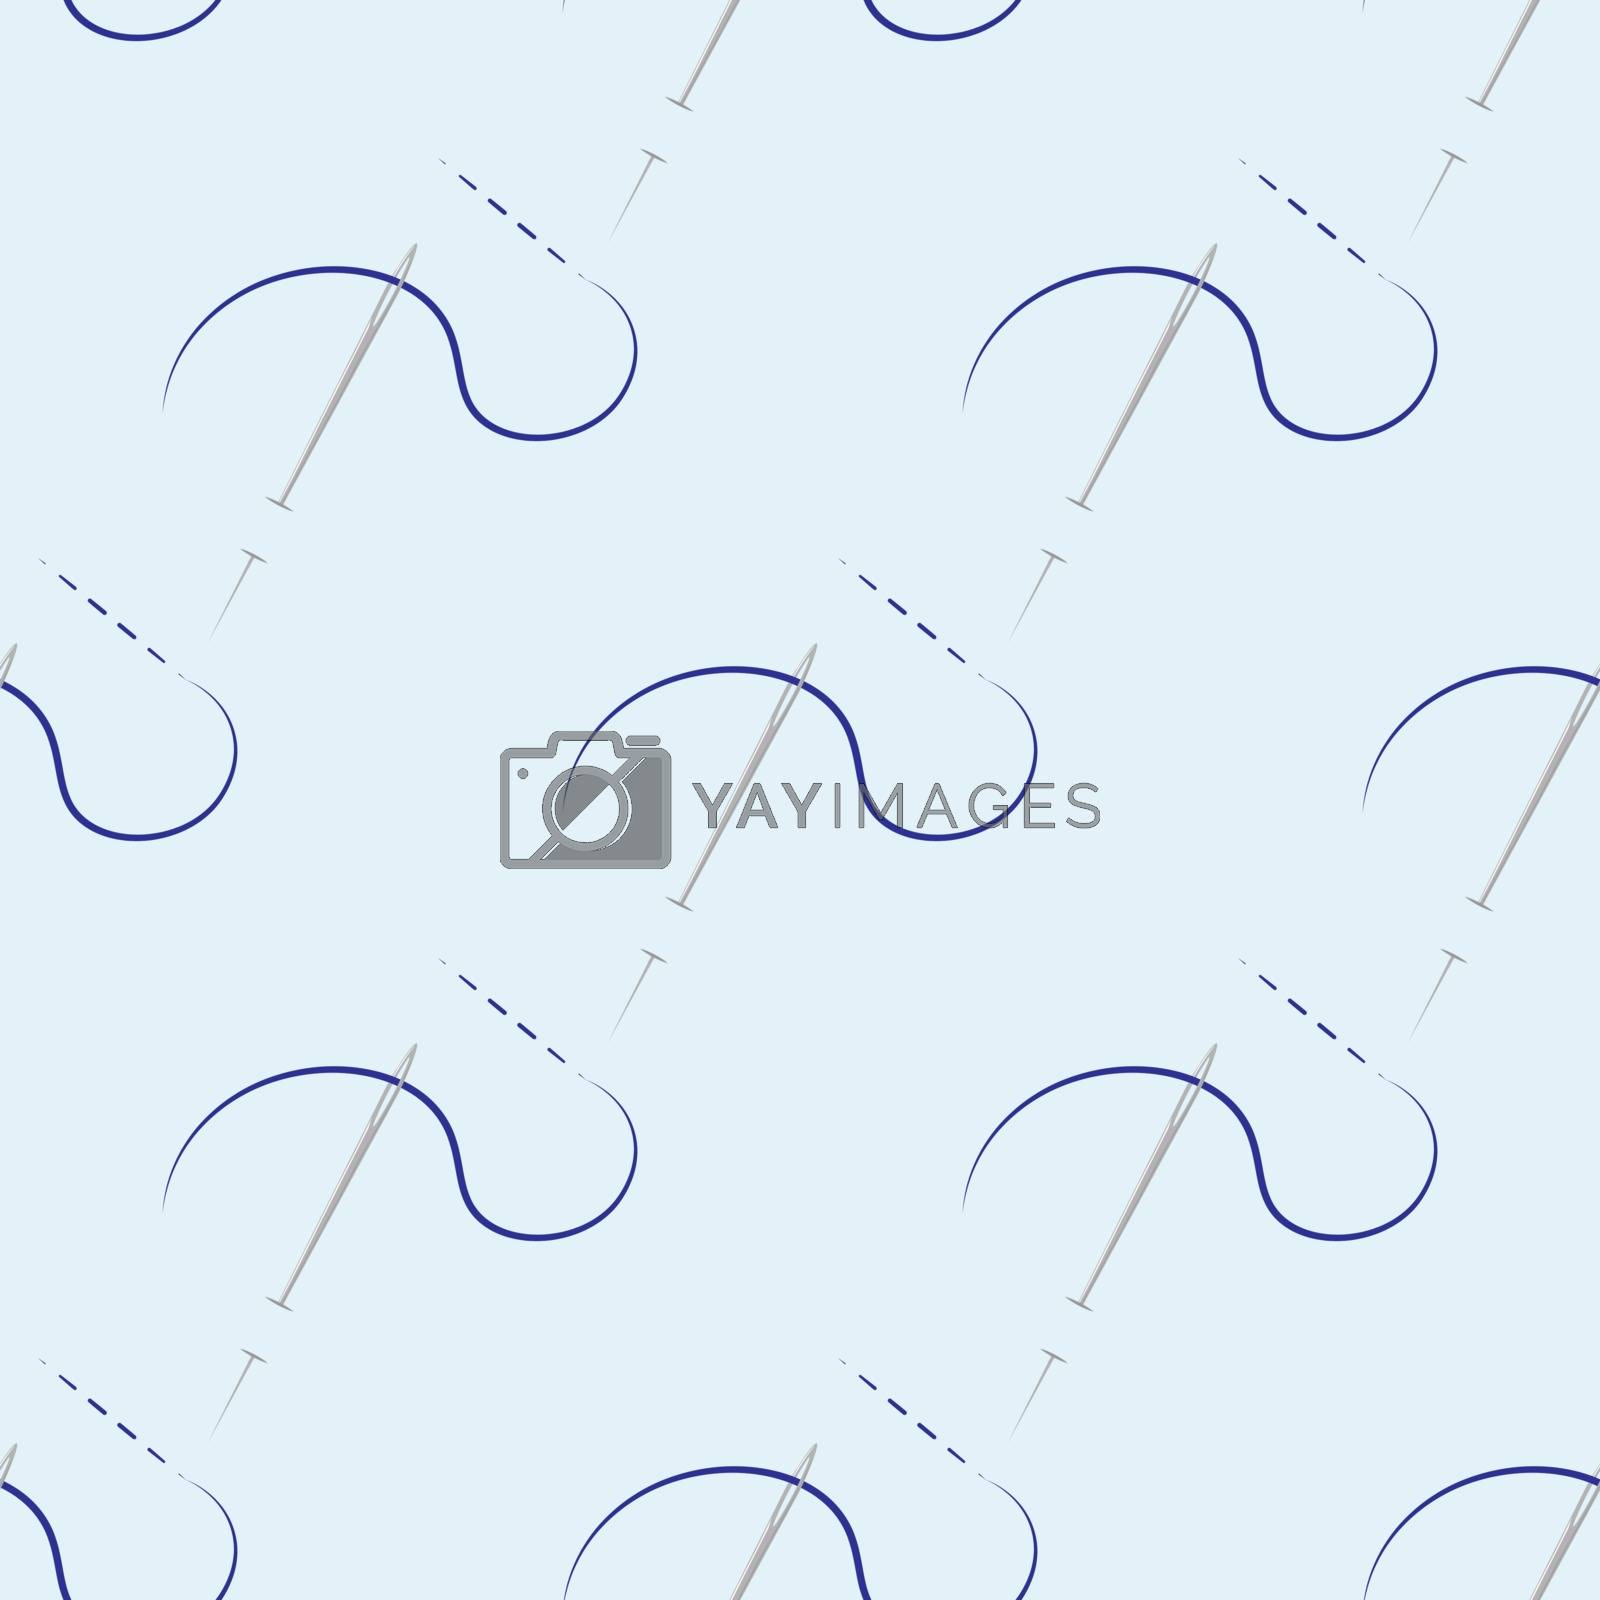 Royalty free image of sewing items. needle and thread stitches seamless pattern by Musjaka